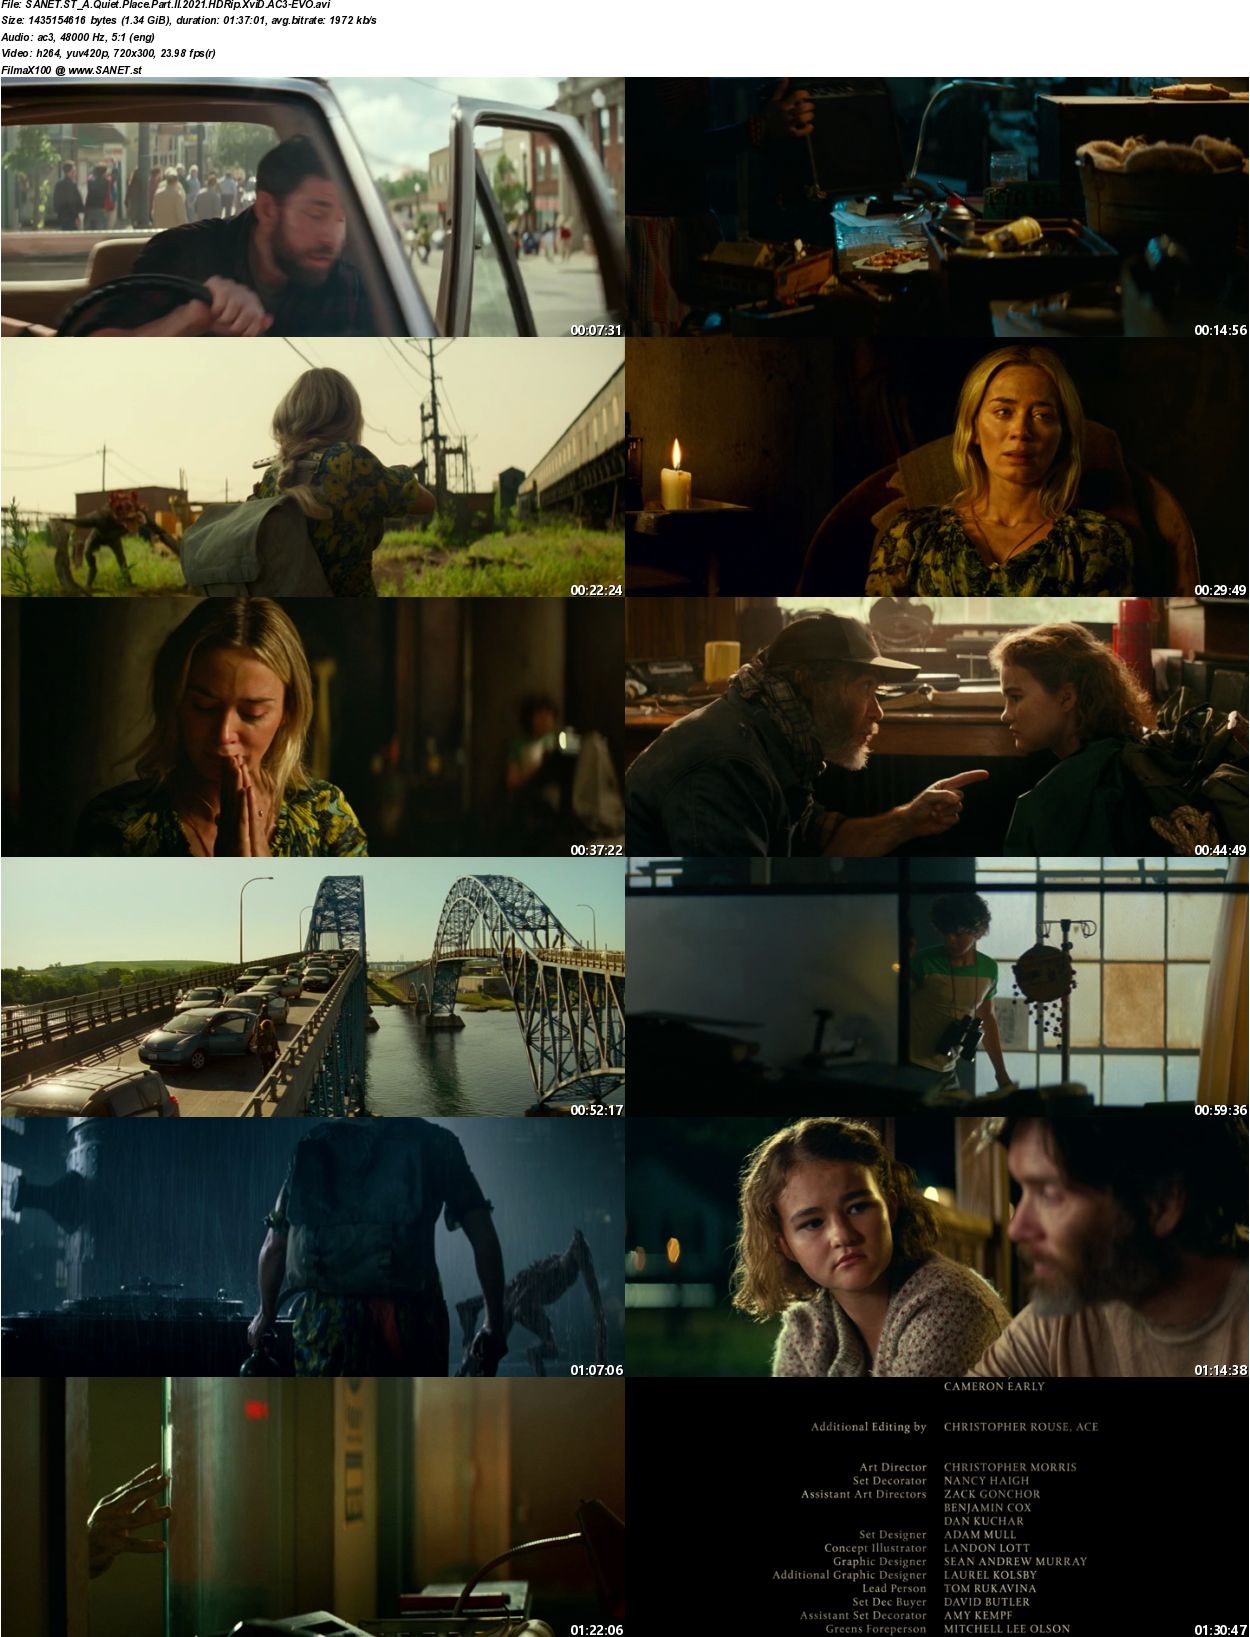 a quiet place tamil dubbed movie download tamilrockers